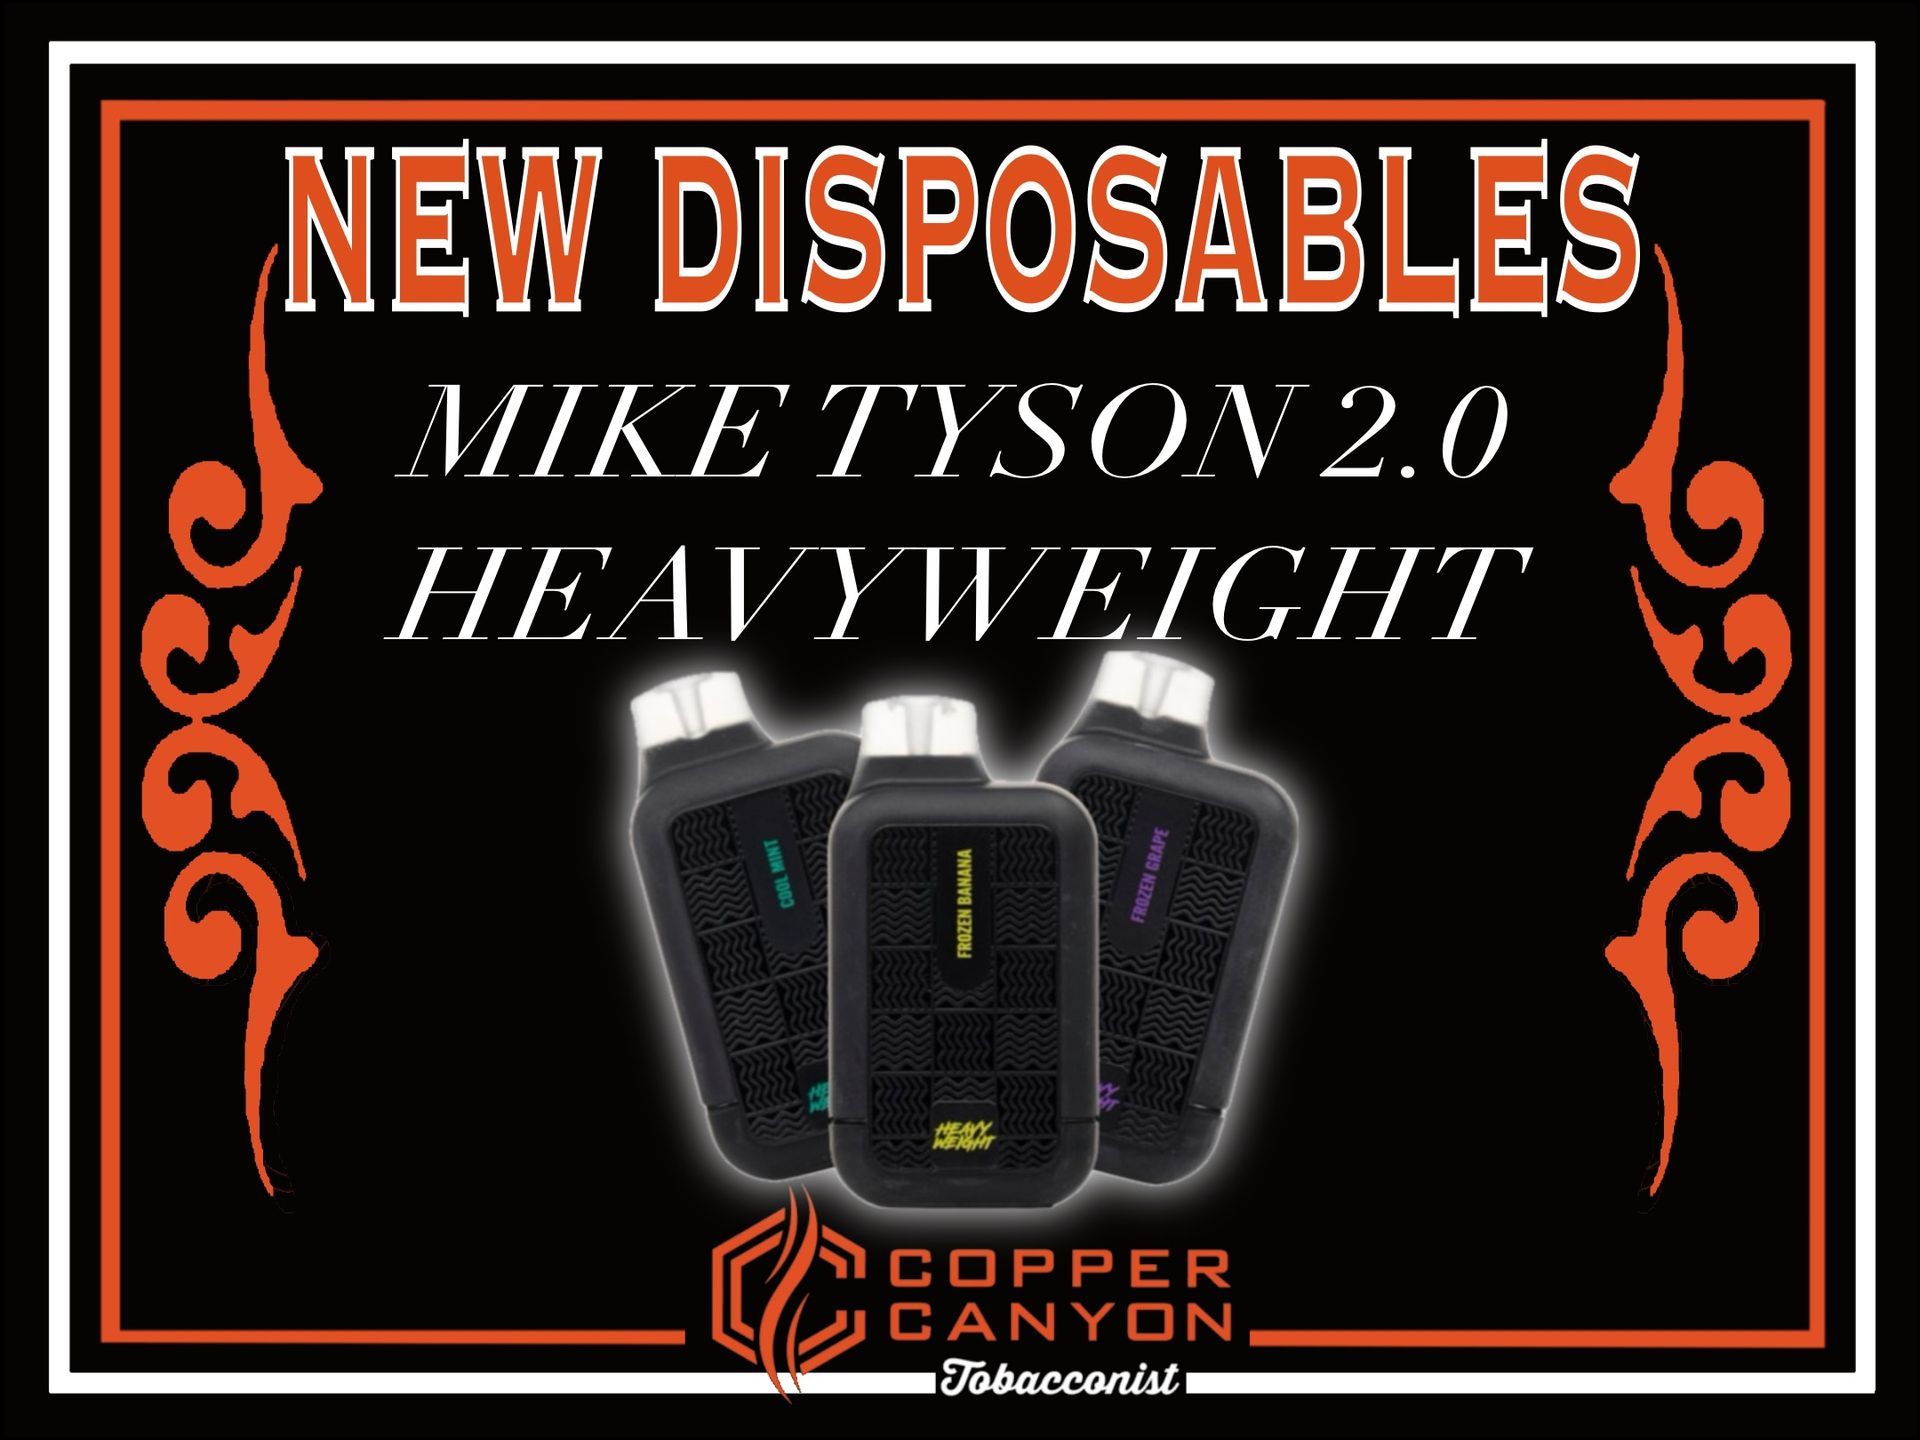 Mike Tyson 2.0 Heavyweight Disposables Now Available